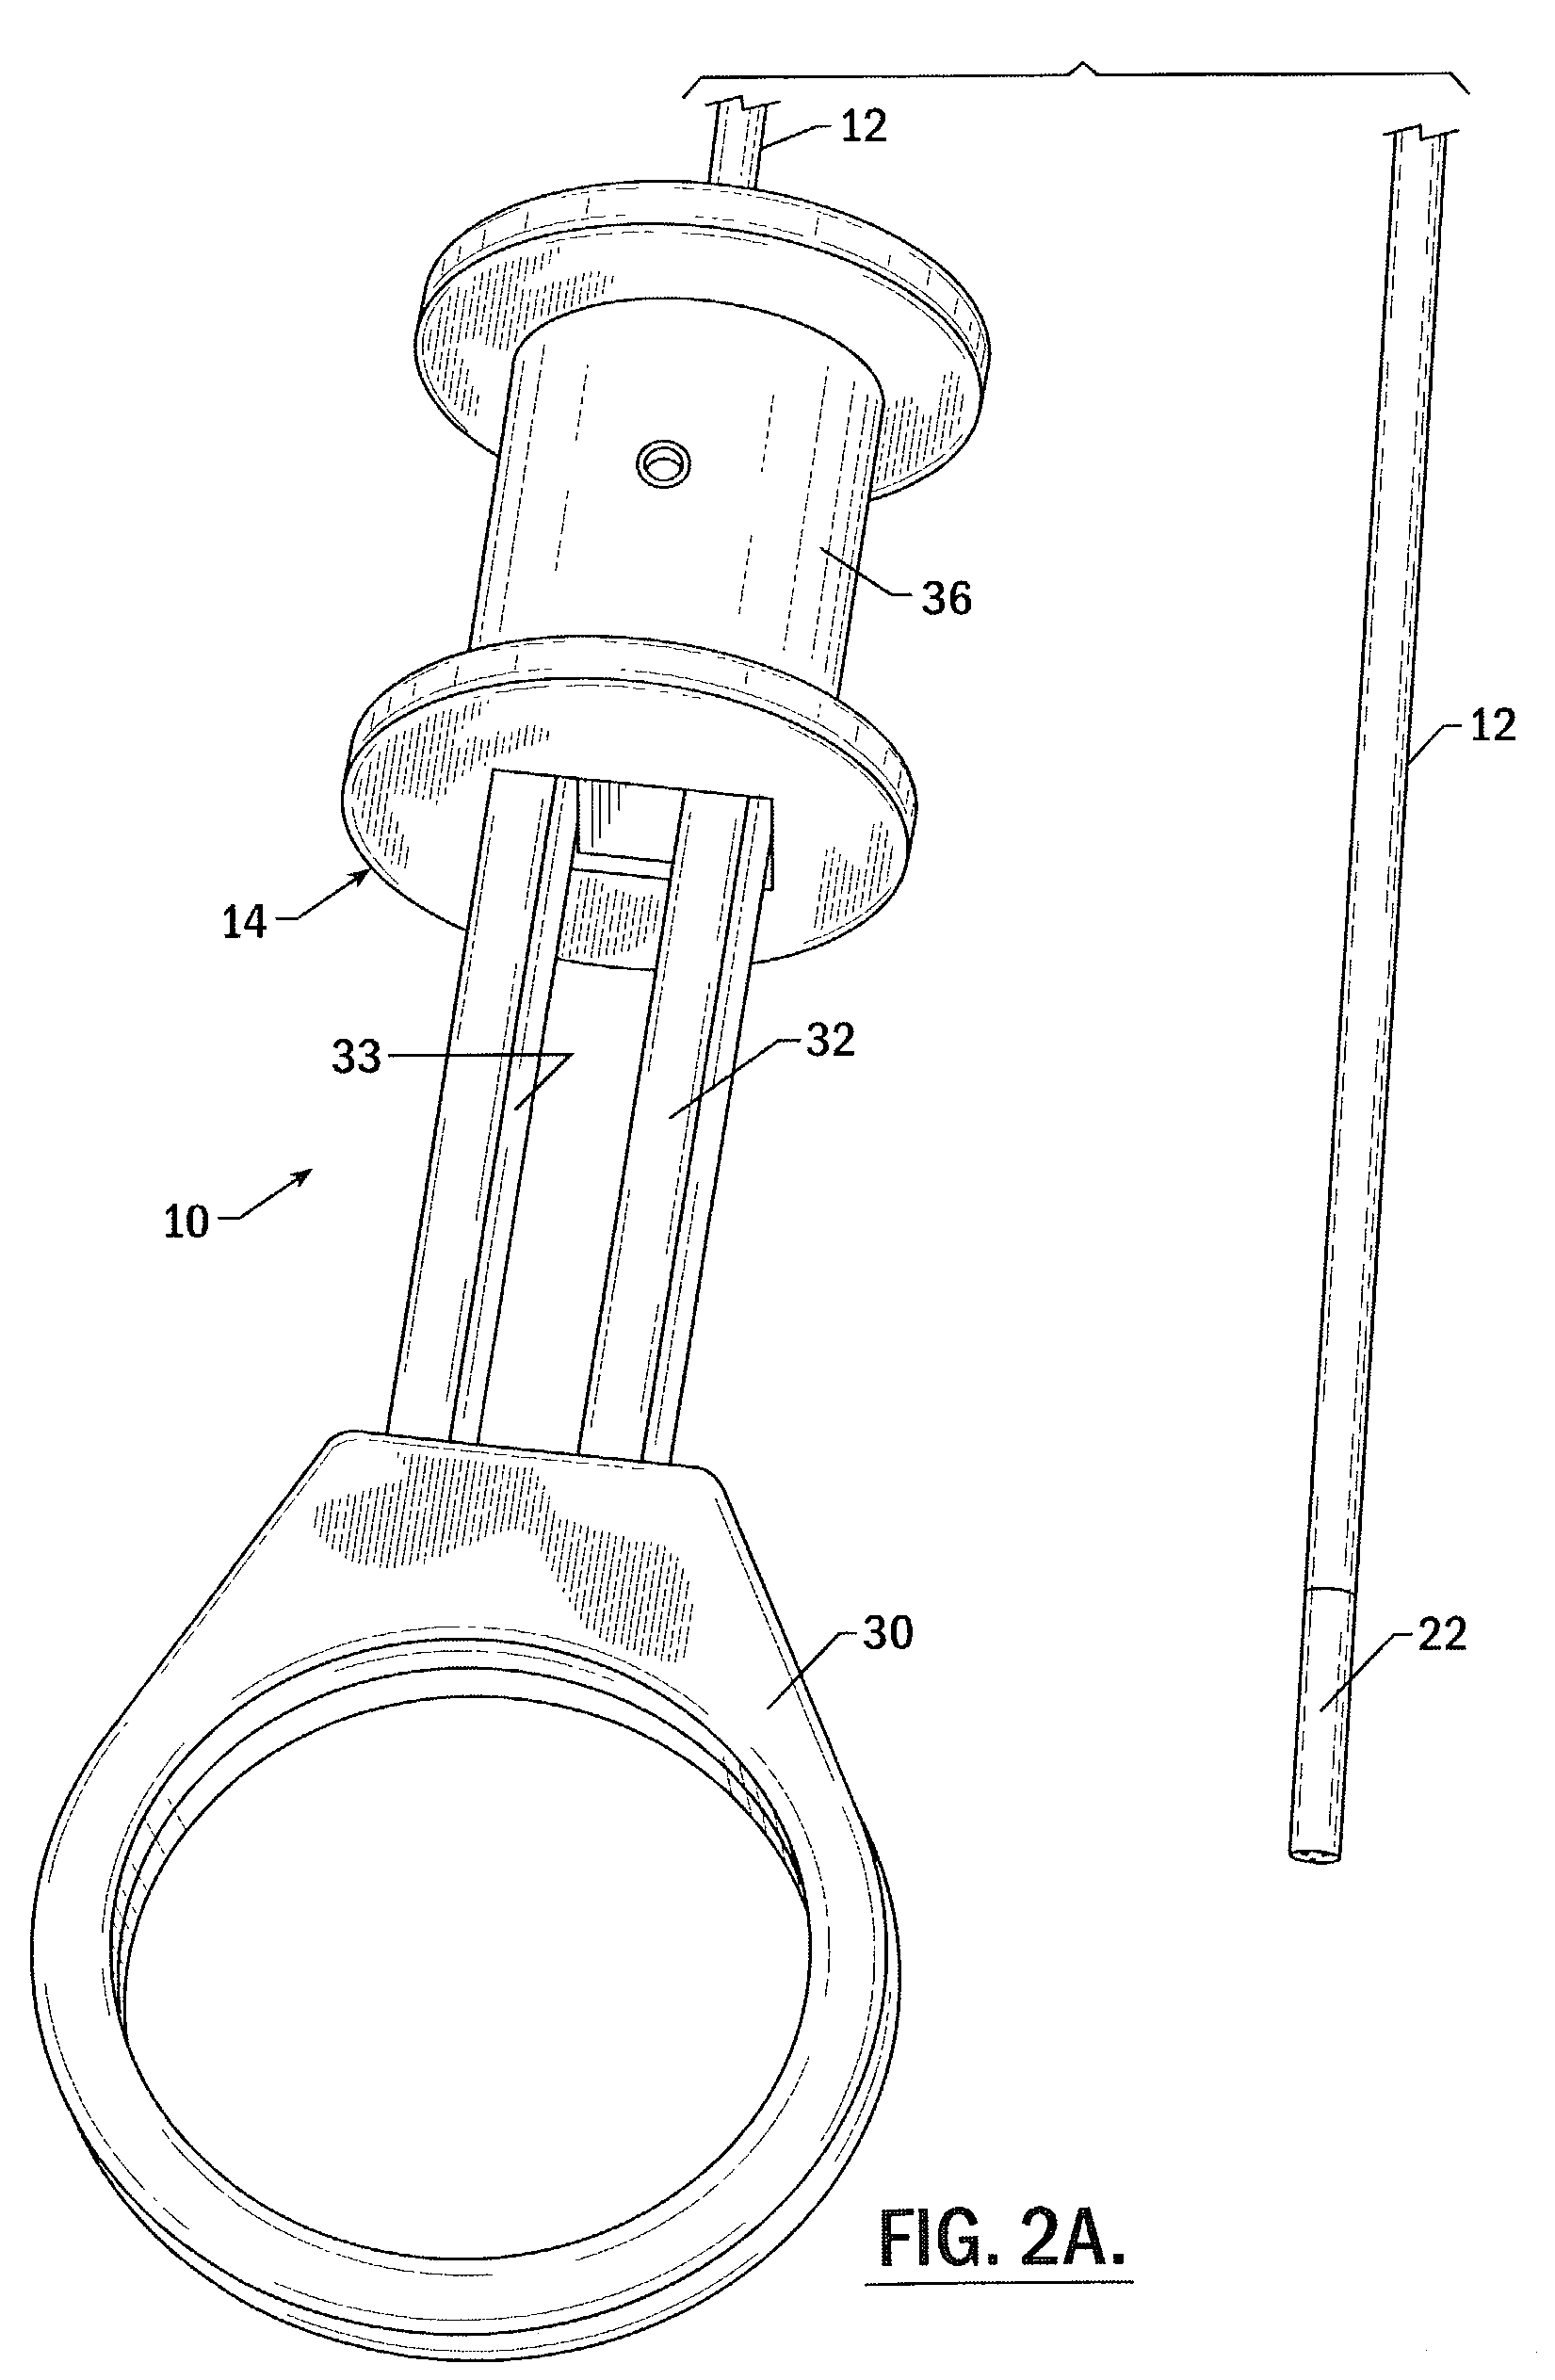 Controlled - motion endoscopic grasping instrument